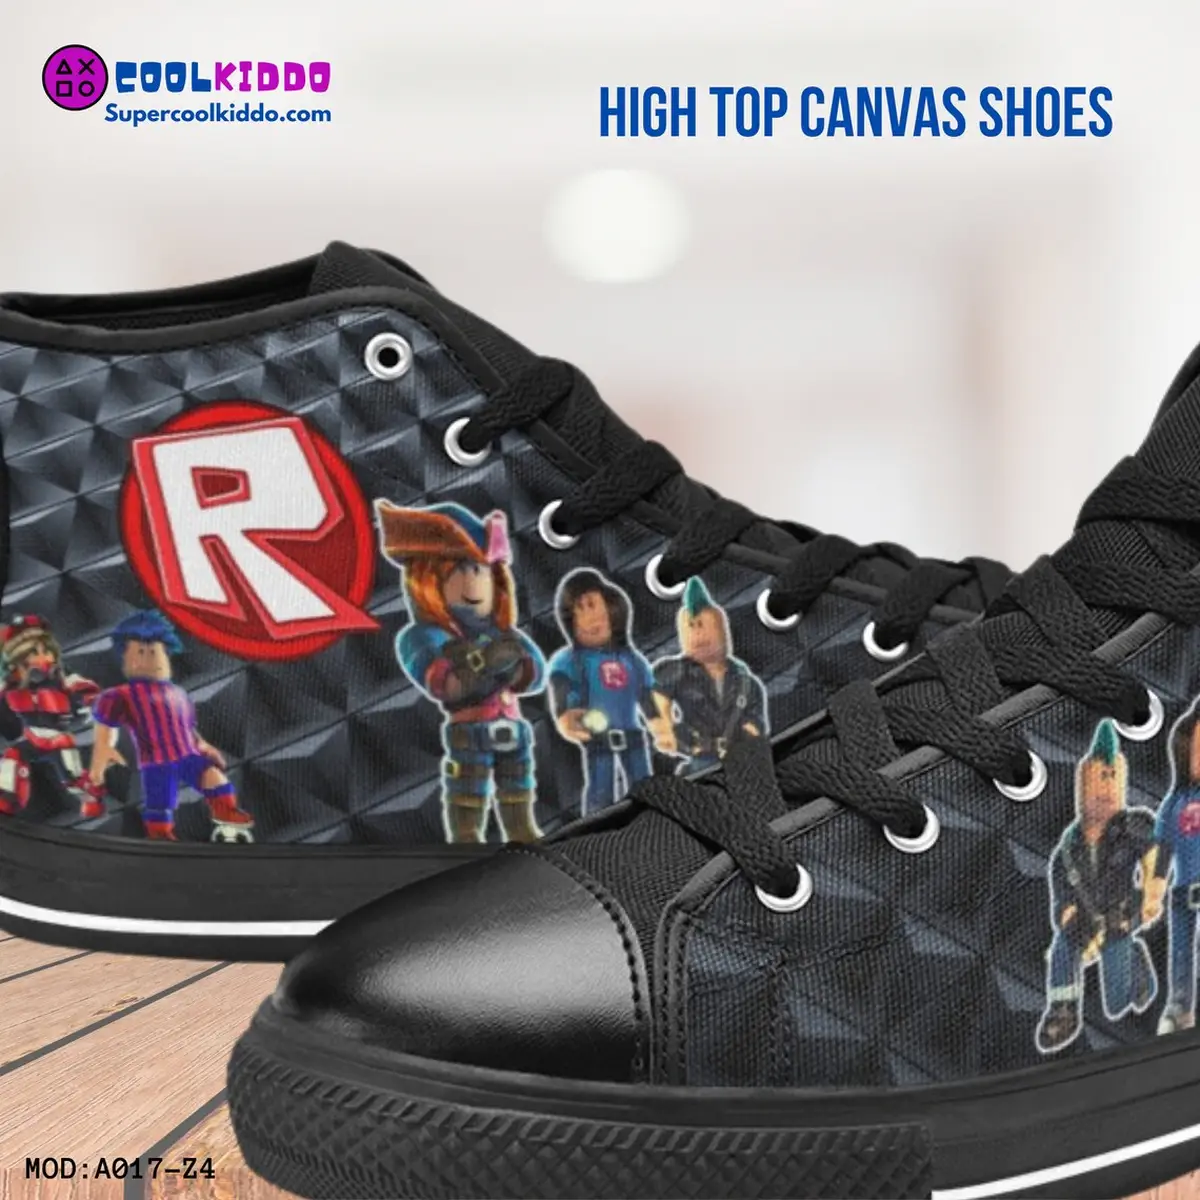 ROBLOX Video Game Inspired High Top Shoes for Kids/Youth Cool Kiddo 12